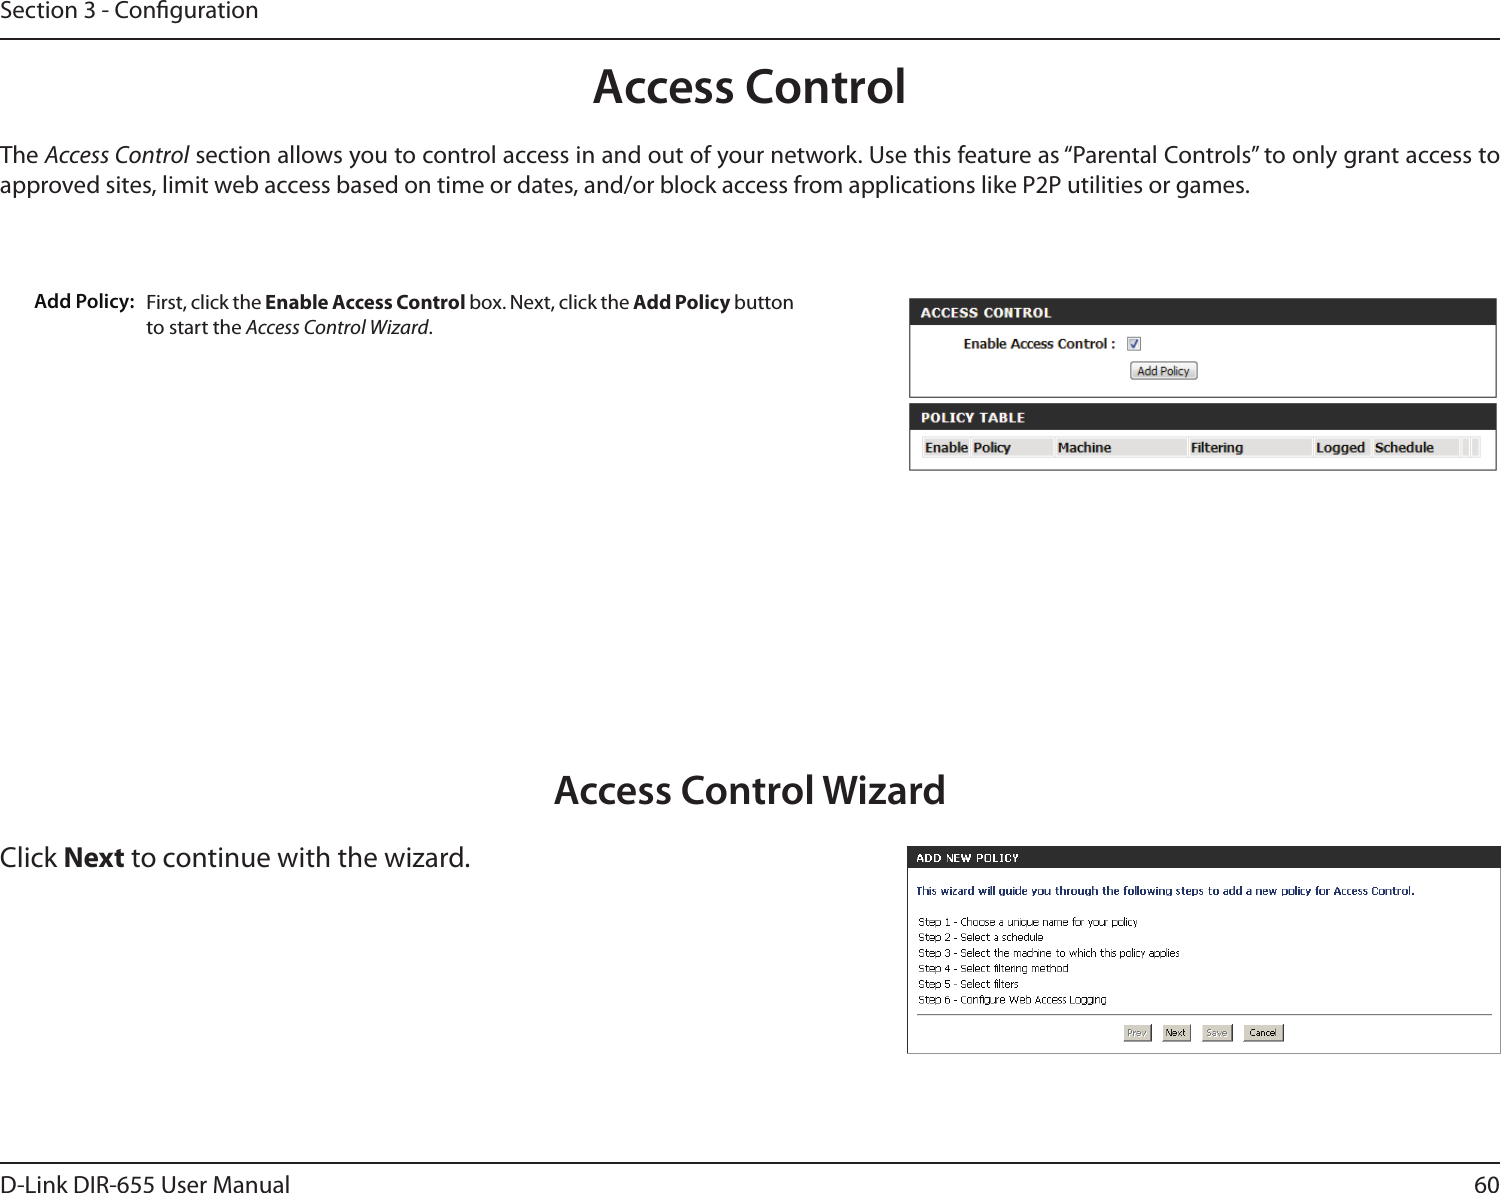 60D-Link DIR-655 User ManualSection 3 - CongurationAccess ControlFirst, click the Enable Access Control box. Next, click the Add Policy button to start the Access Control Wizard. Add Policy:The Access Control section allows you to control access in and out of your network. Use this feature as “Parental Controls” to only grant access to approved sites, limit web access based on time or dates, and/or block access from applications like P2P utilities or games.Click Next to continue with the wizard.Access Control Wizard